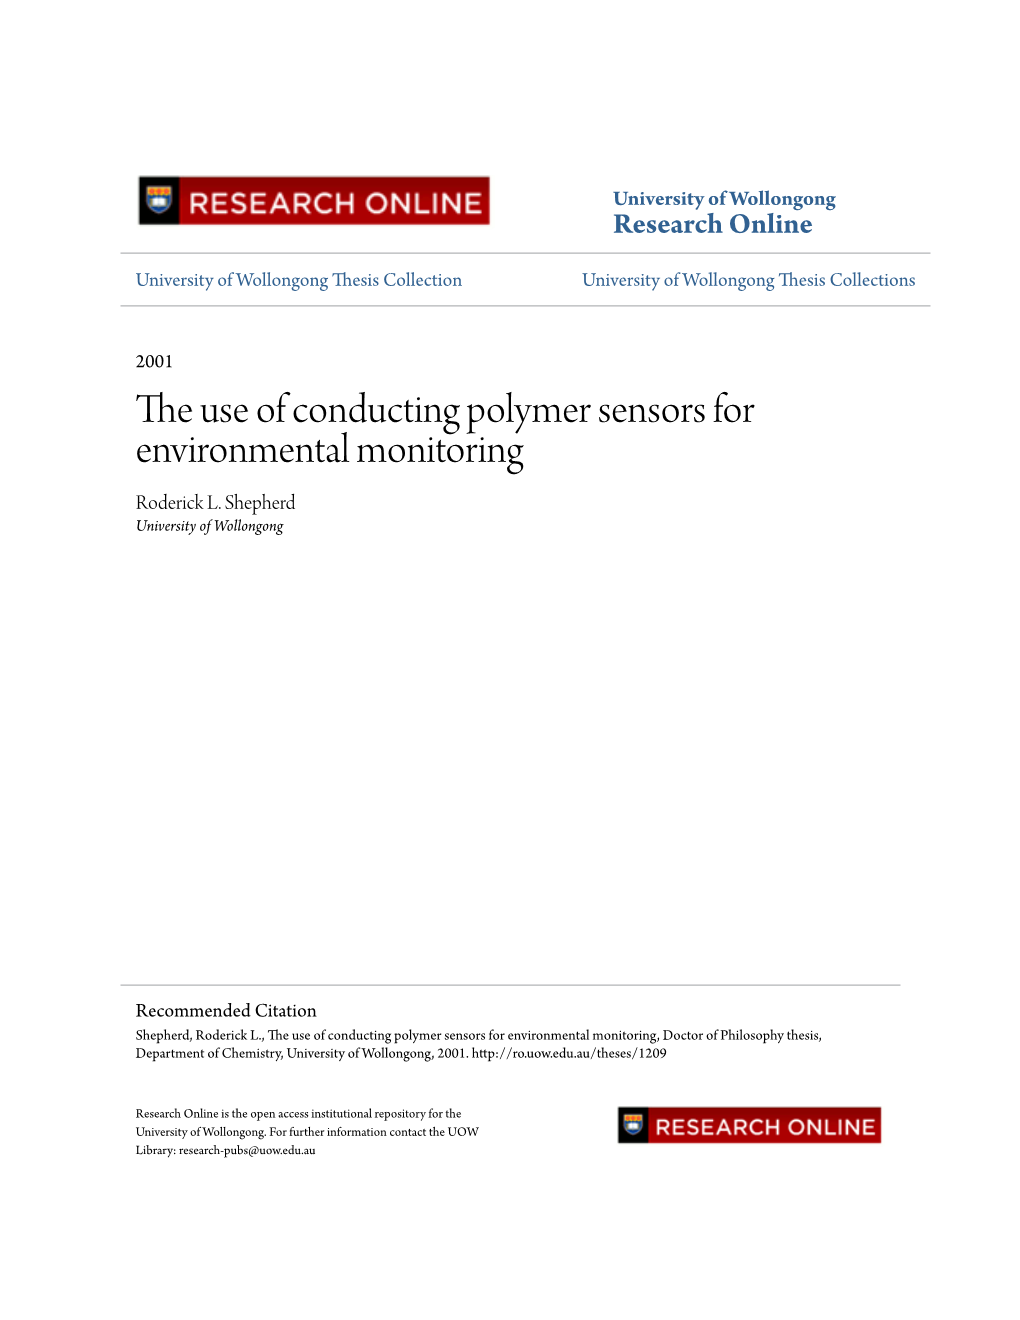 The Use of Conducting Polymer Sensors for Environmental Monitoring, Doctor of Philosophy Thesis, Department of Chemistry, University of Wollongong, 2001